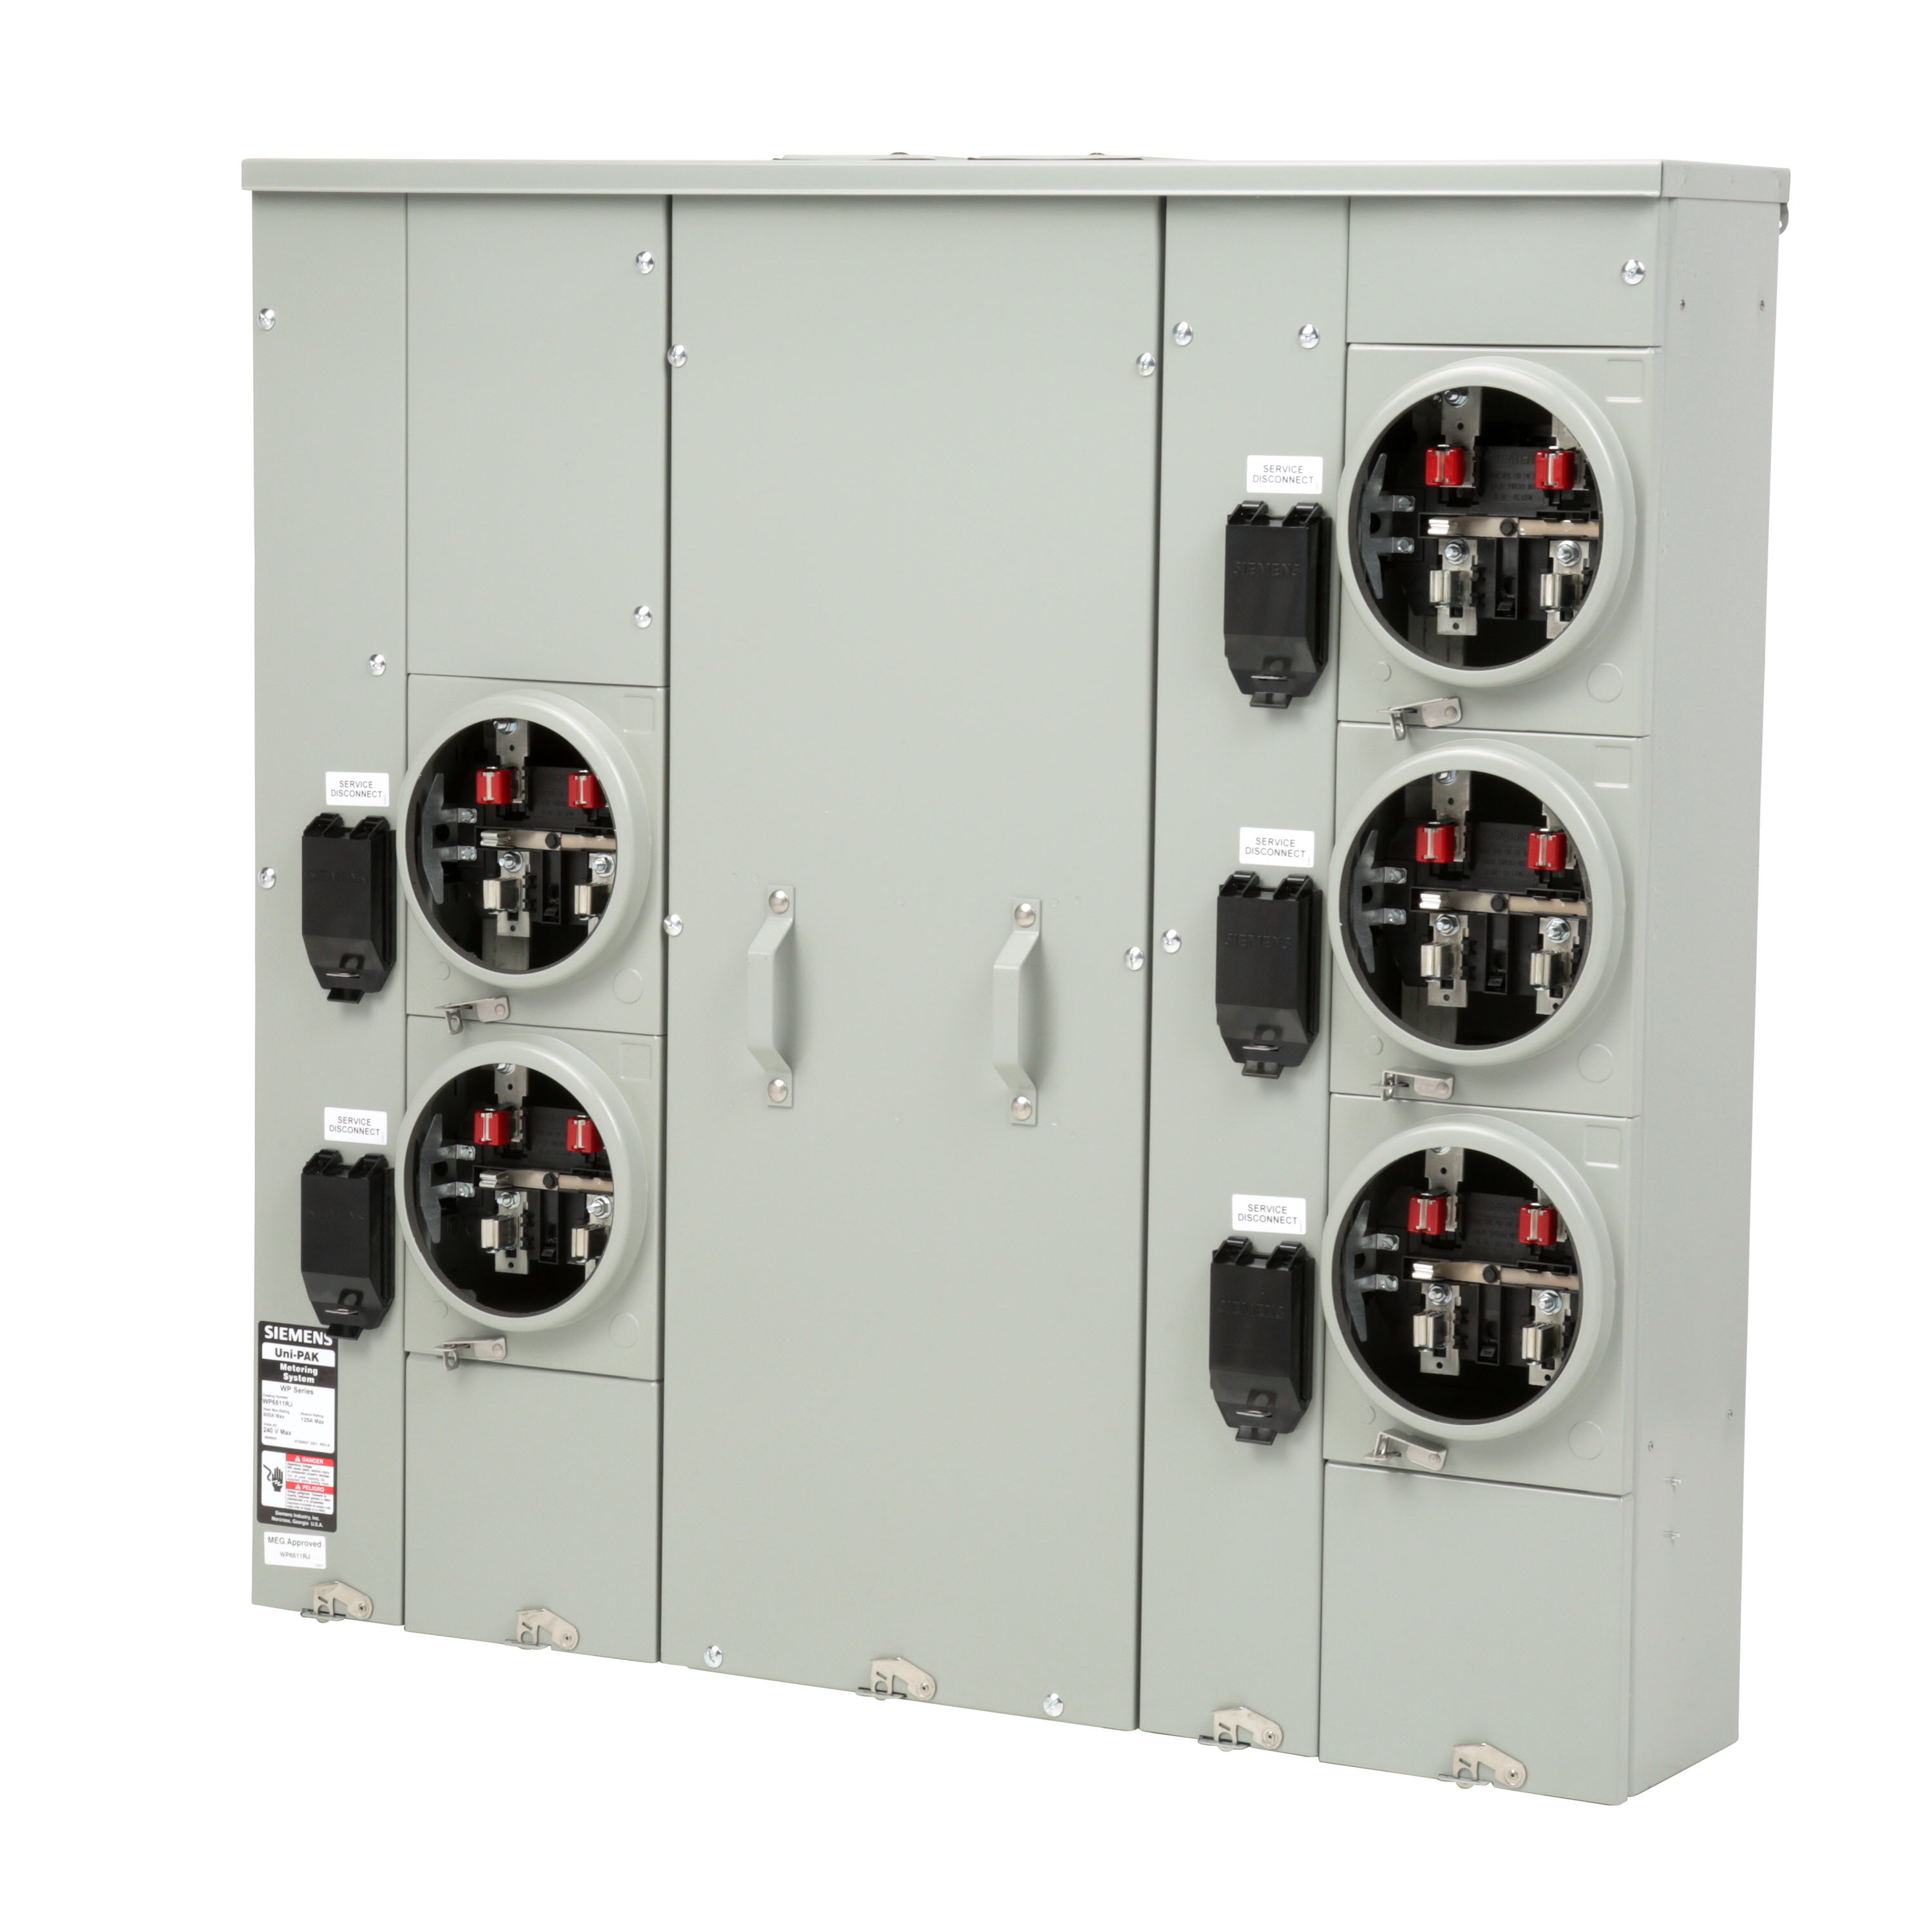 Siemens Low Voltage s Multi-Family Metering Line of PAK Metering Standard 125A as part of the PAK Metering Standard 125A Group. Type UNI-PAK Features NO BYPASSAppn GARDEN - STYLE Std UL-50,67,414 V. Rating 120/240V A. Rating 600A Phase 1PH Size 9.000x45.07 x 39.690 No. Of Cutouts 17 Cutout Size 1 x (1/2,3/4,1,1-1/4 ), 12 x (2-1/2,2 ,1-1/2,1-1/4,1 ), 2 x (4,3-1/2,3,2-1/2,2 ), 2X4 Cable Entry TOP OR BOTTOM FEED Terminal 3X2 STUDS. Insulated.Appn . Wall Mounted. Enclosure RINGLESS